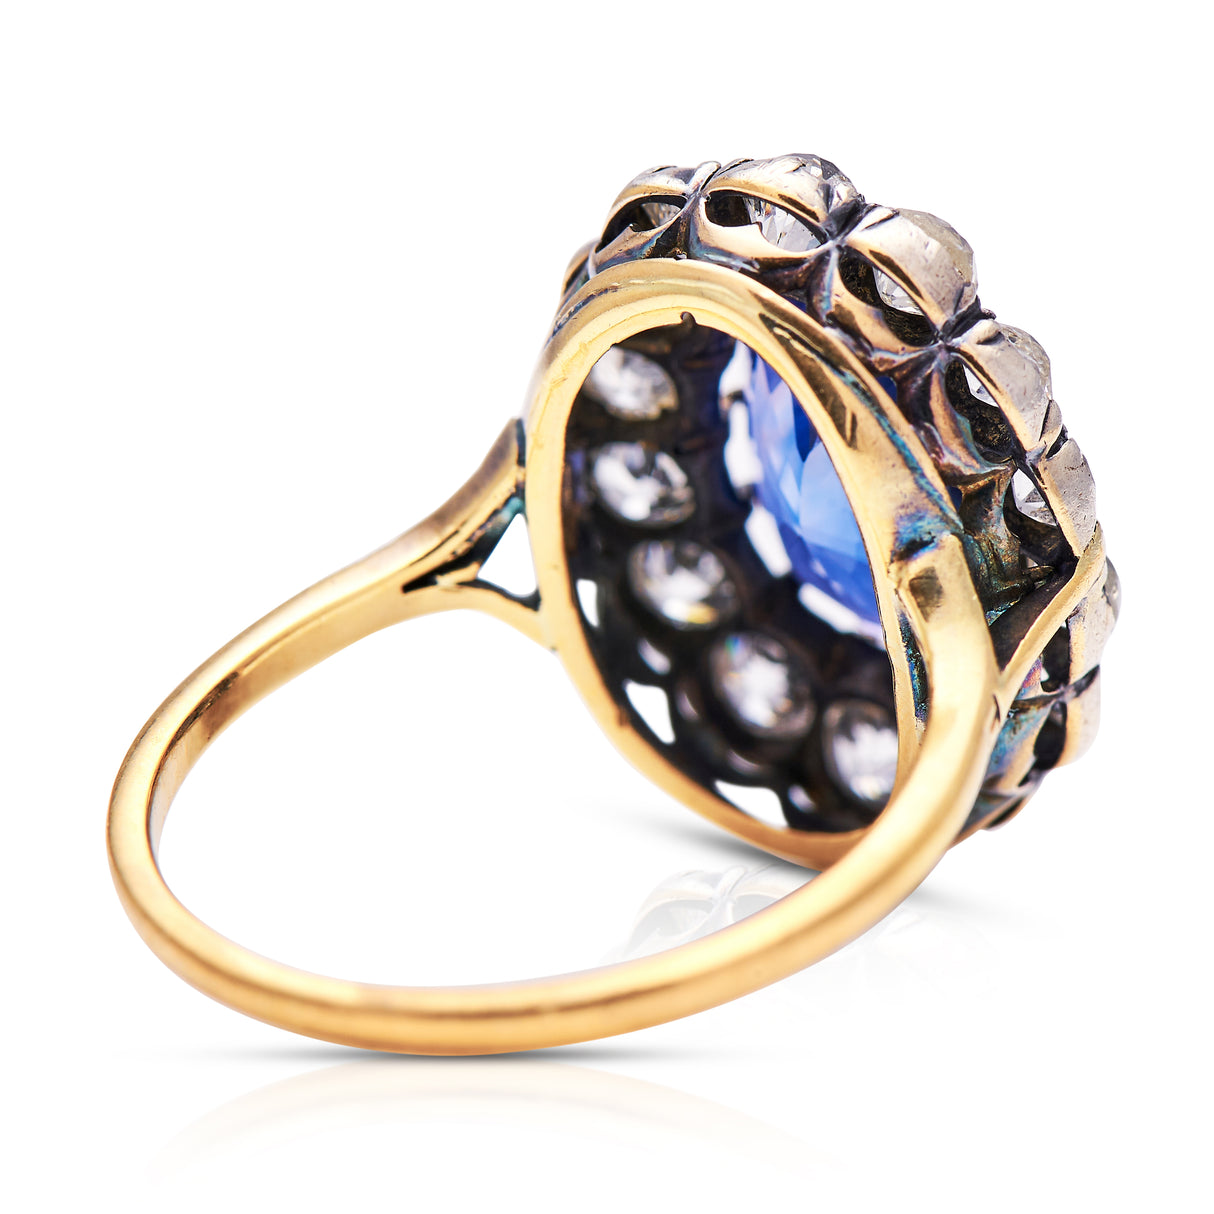 Victorian, 18ct Gold, Sapphire and Diamond Cluster Ring